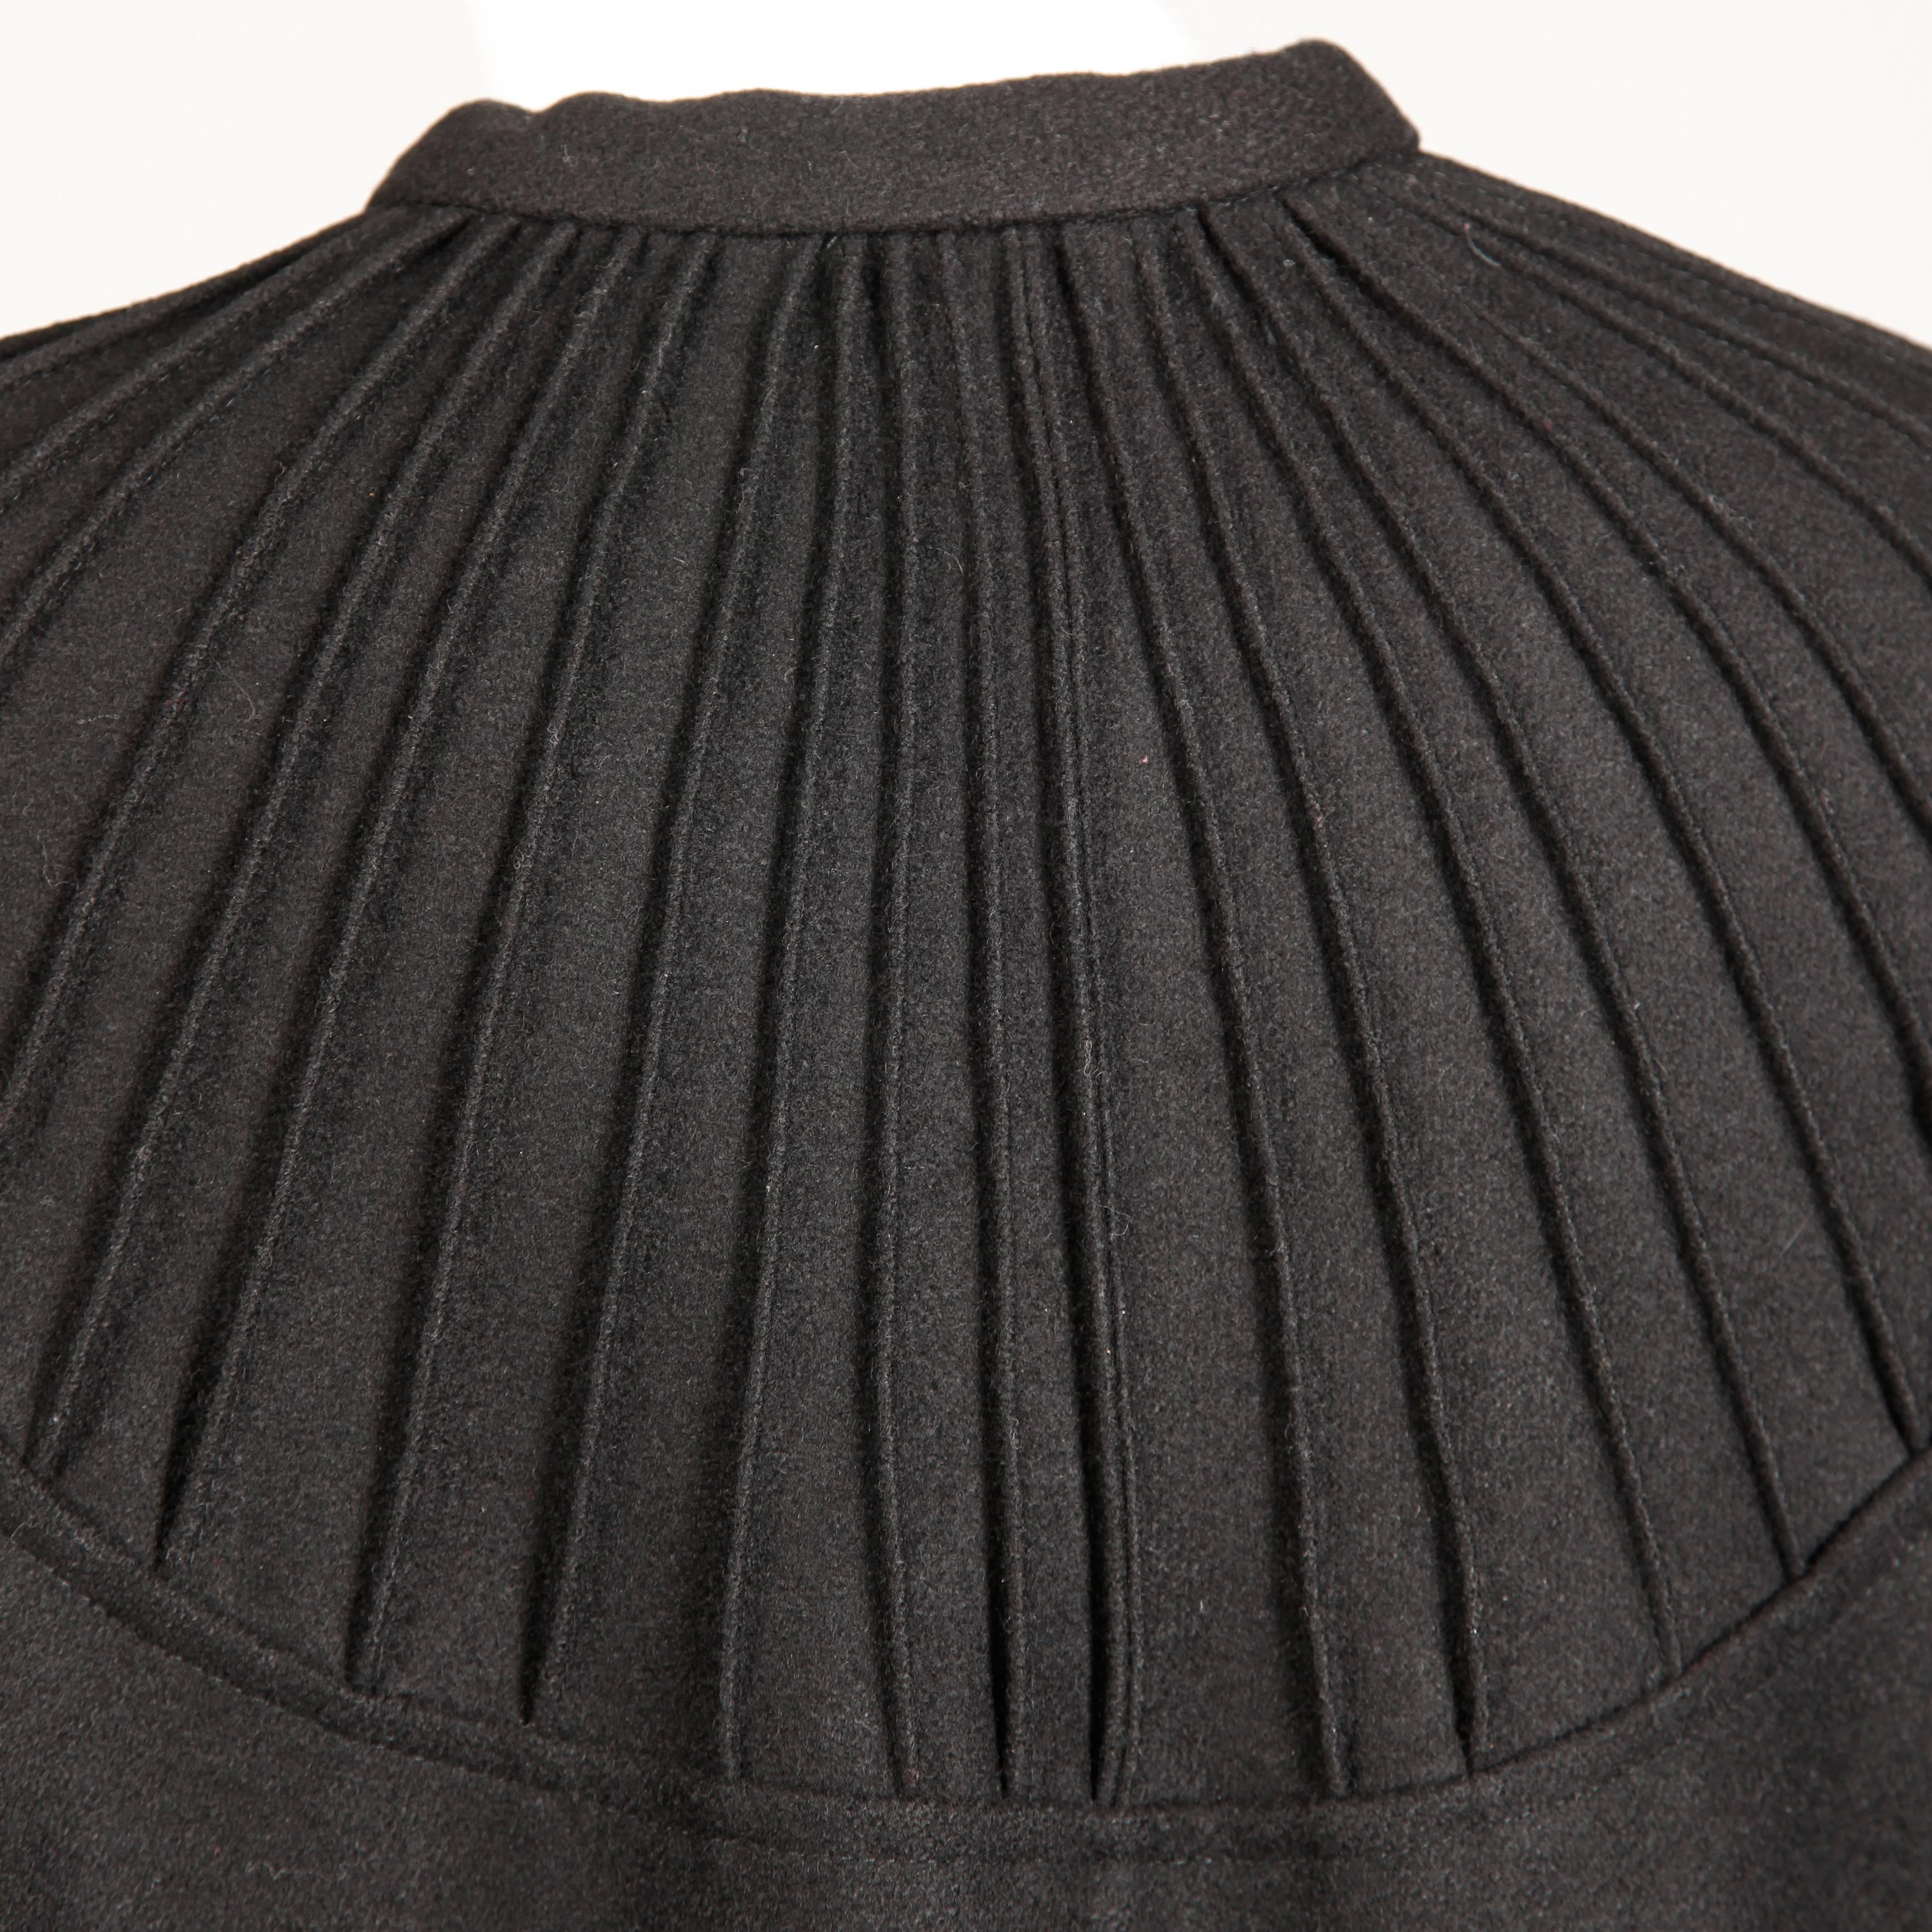 Heavy and warm vintage 1970s black wool cape coat by Luba Rudenko. This cape has top stitching around the neckline in a radial design and an ascot tie at the neck. It hooks in front with a single hook closure. Unlined. Will fit most sizes on account